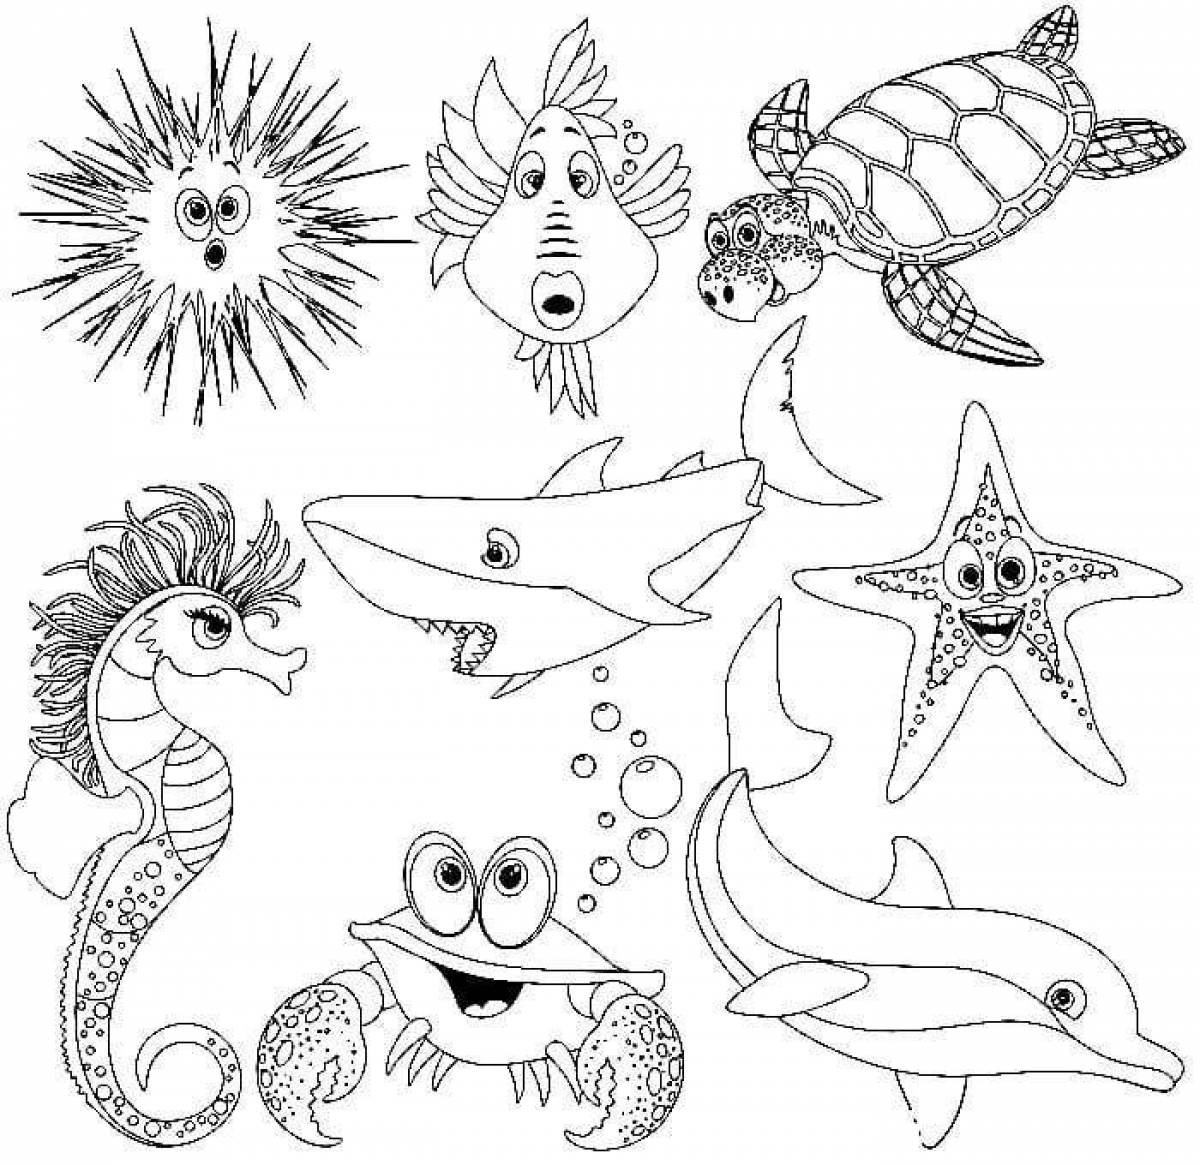 Vibrant coral reef coloring page for kids